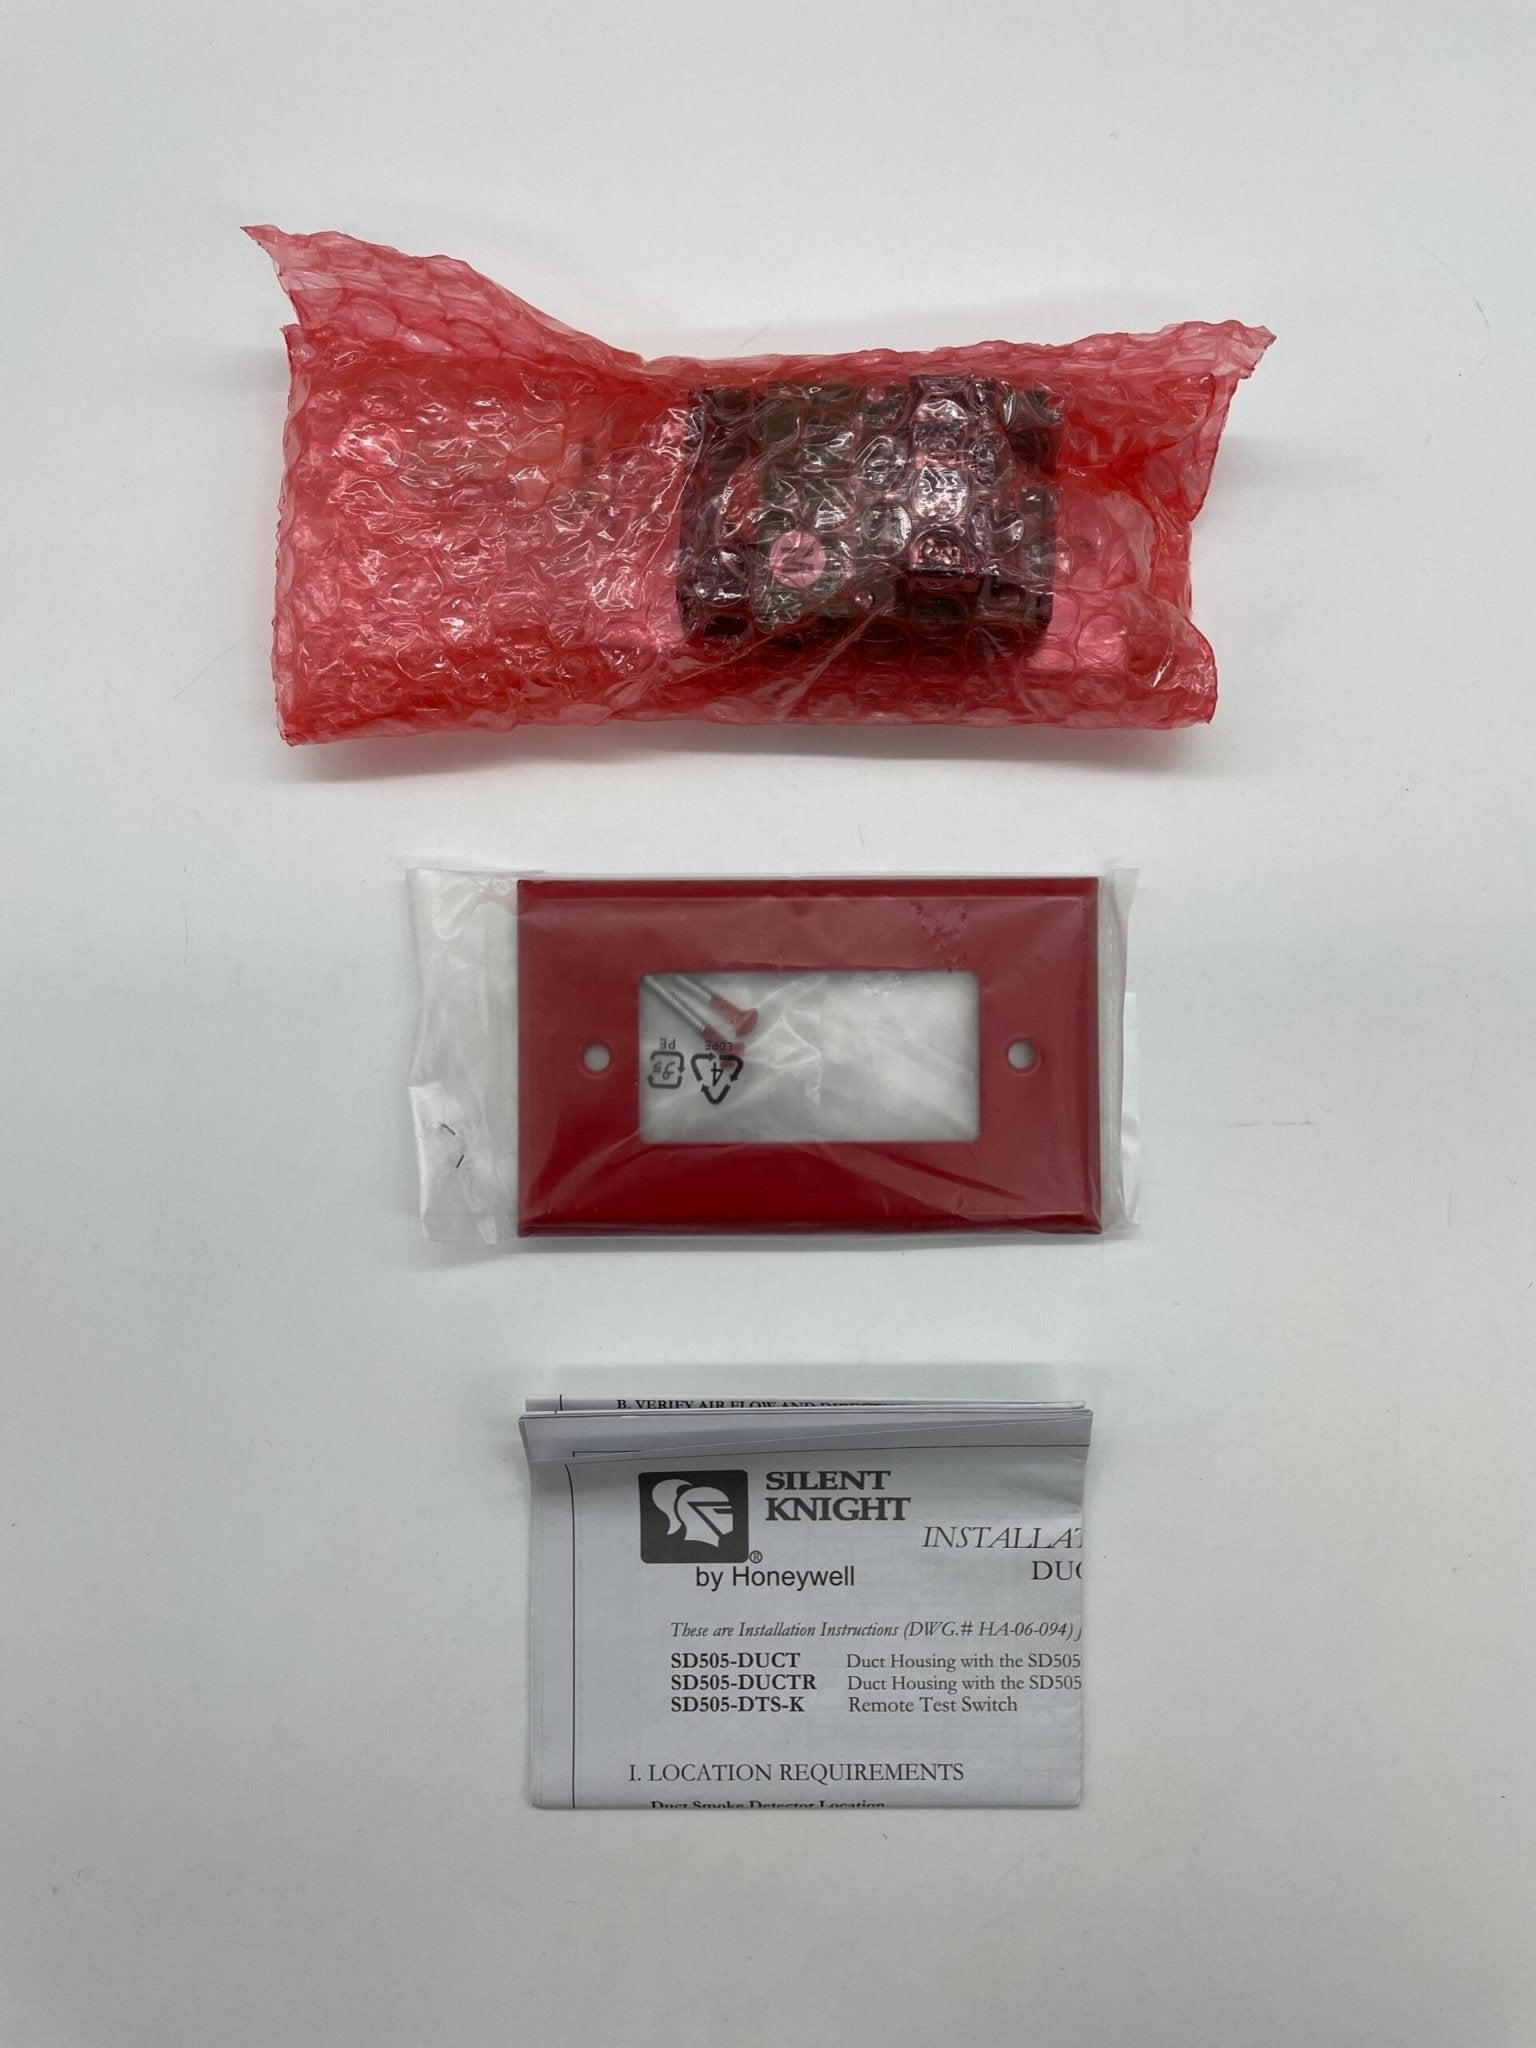 Silent Knight SD505-DTS-K Remote Test Switch - The Fire Alarm Supplier